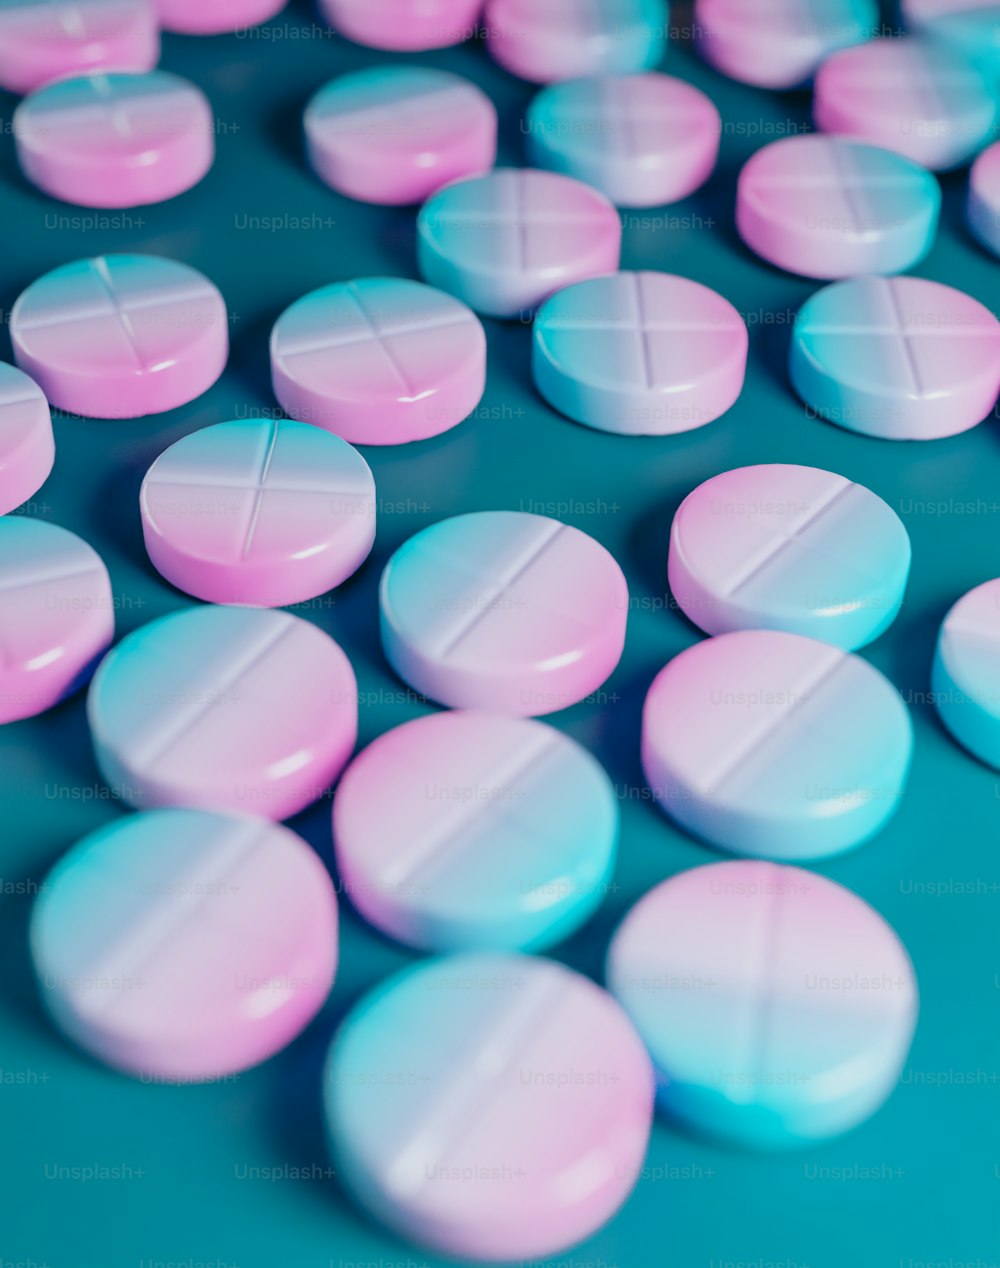 a close up of many pink and blue pills photo – Medication Image on Unsplash